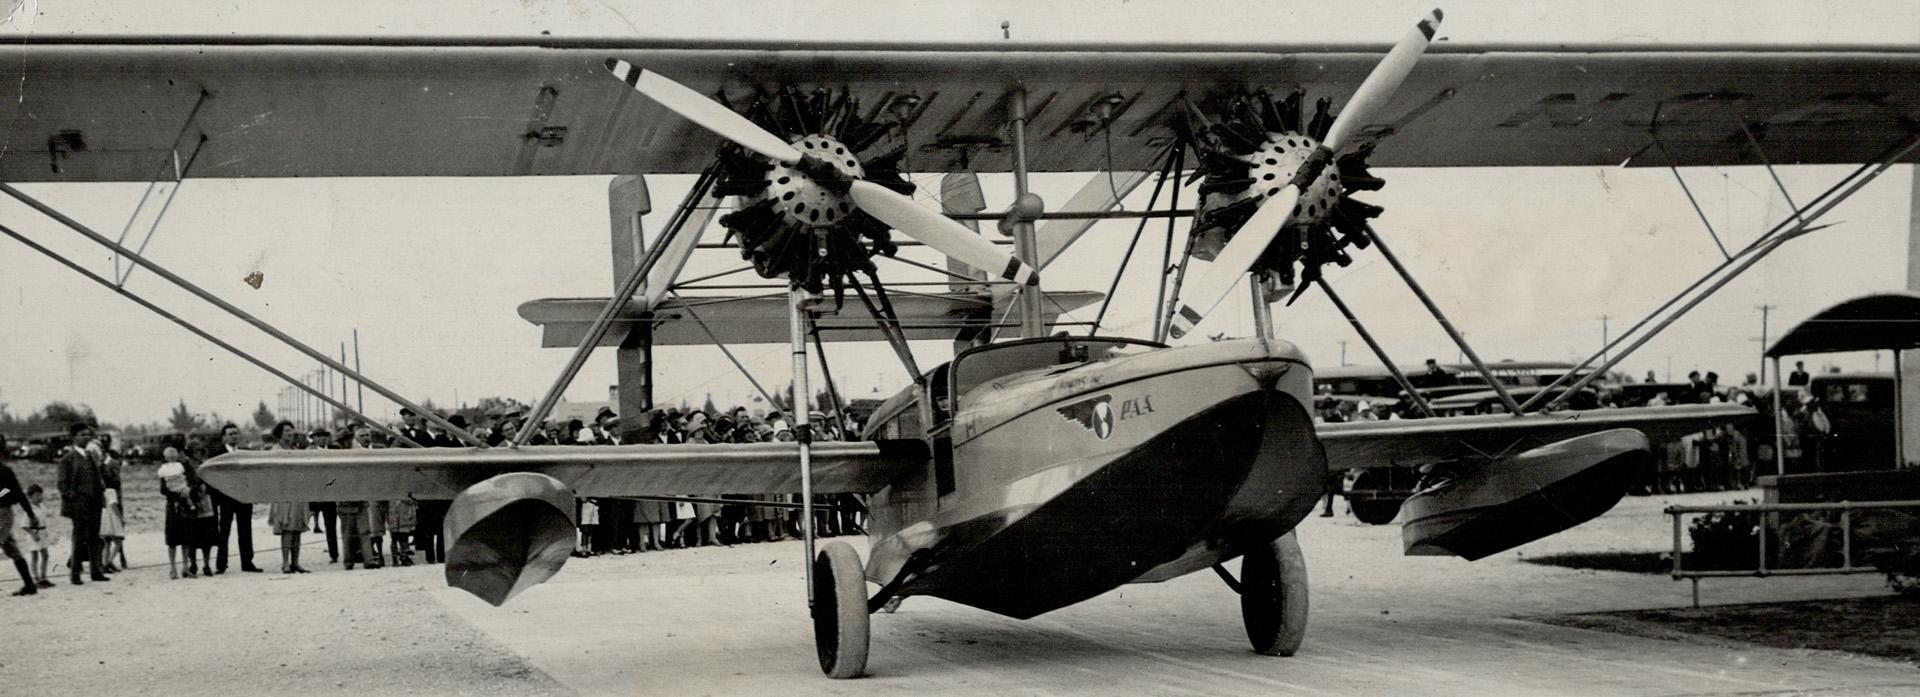 Lindbergh celebrated his 27th birthday by flying this plane to inaugurate a Florida-Panama air mail sevice.